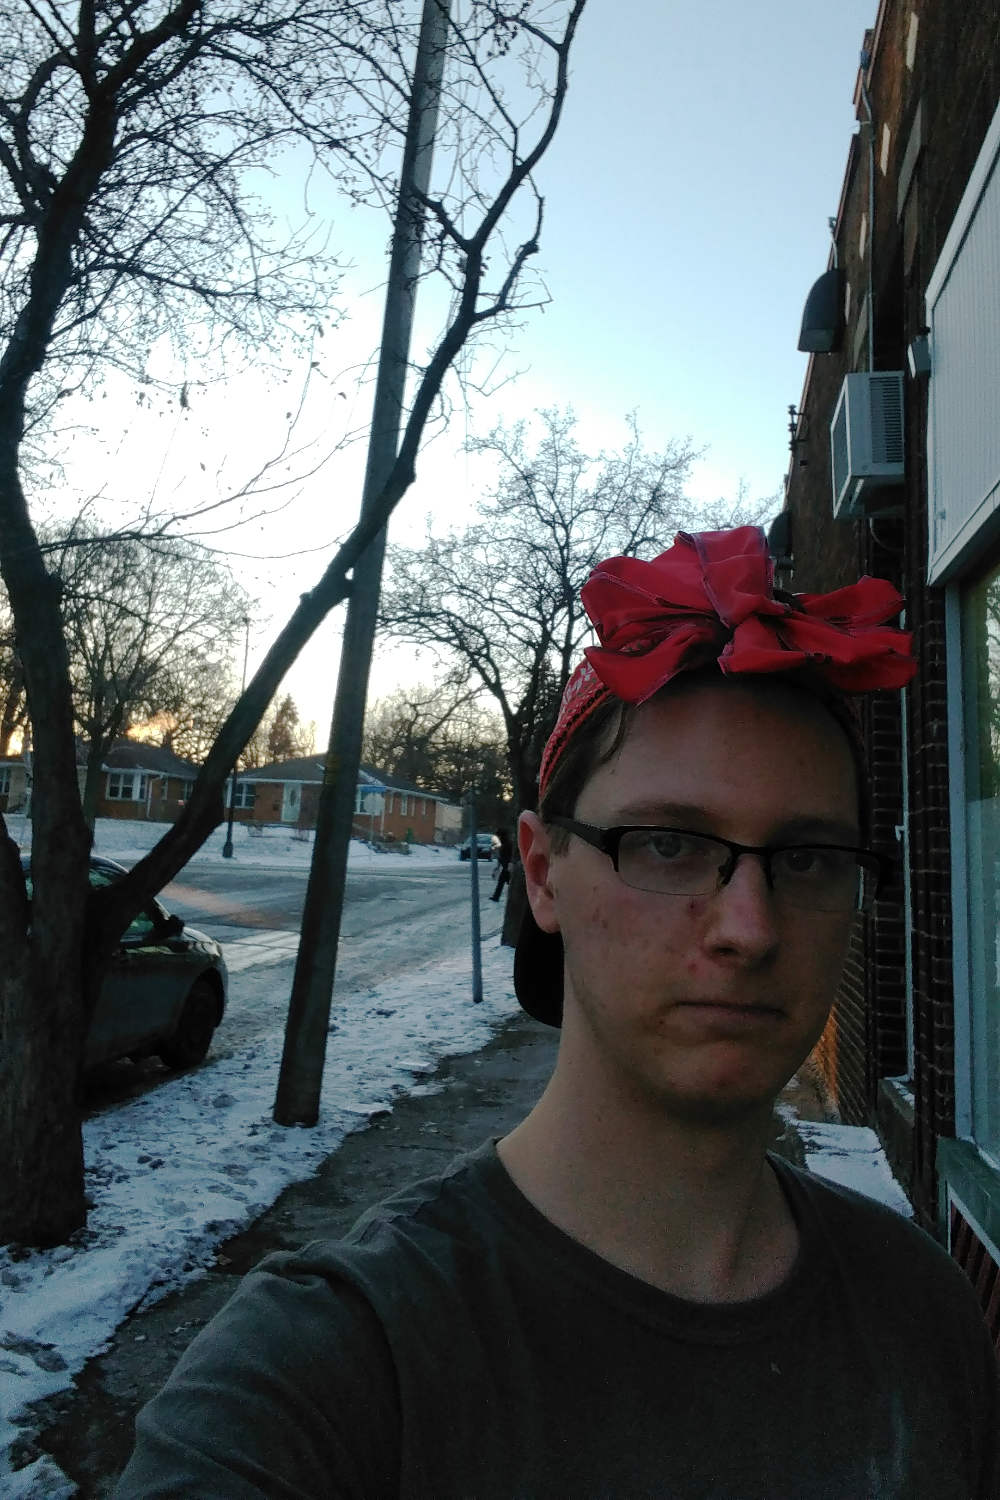 darkly lit man with red bow on head standing on a street of storefronts